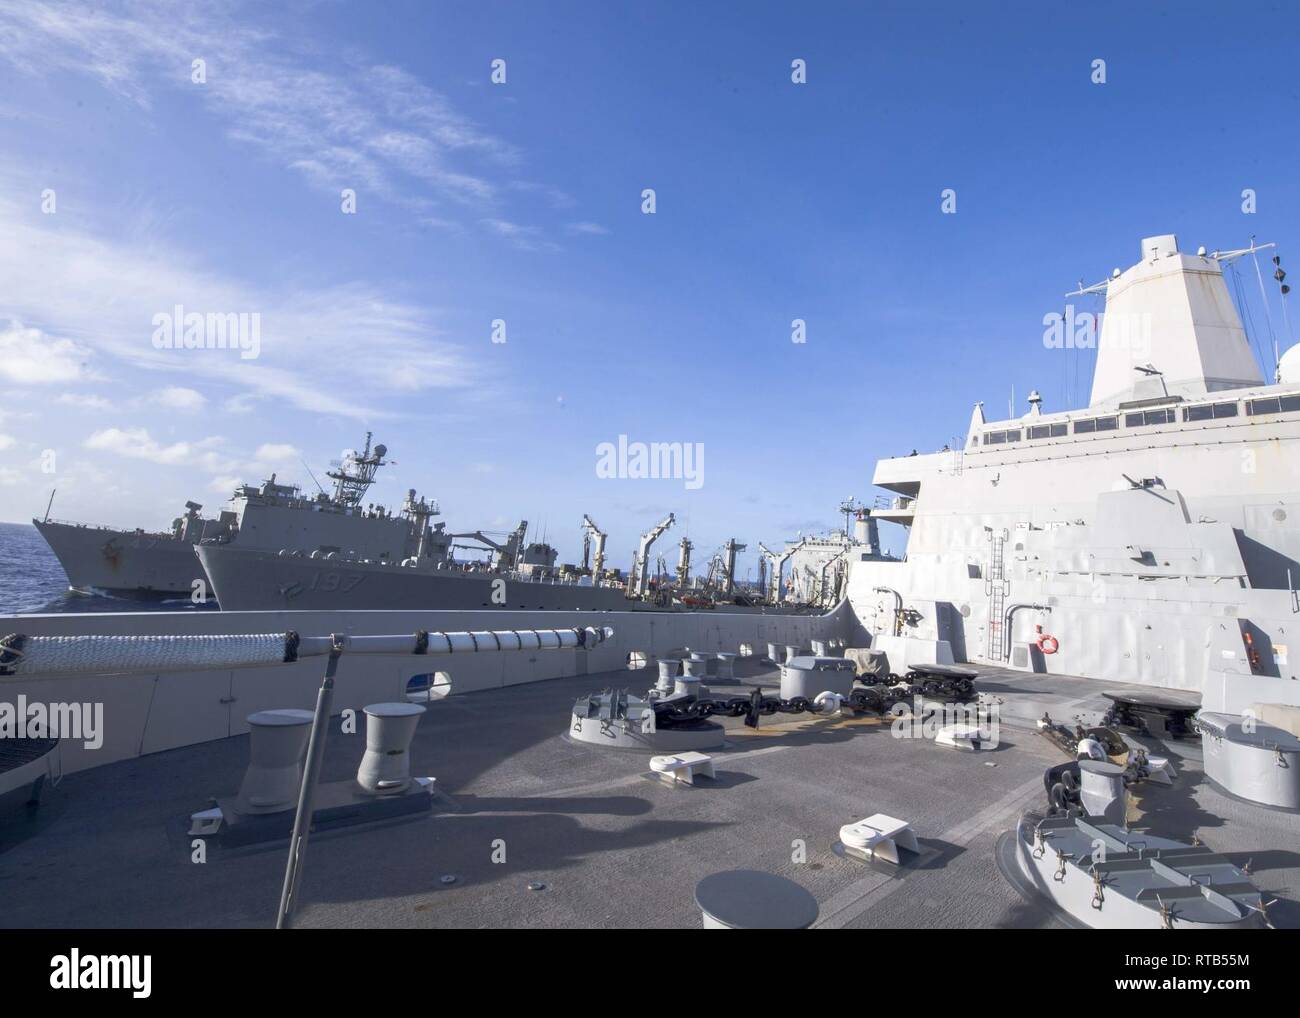 PACIFIC OCEAN (Feb. 7, 2019) The San Antonio-class amphibious transport dock ship USS Anchorage (LPD 23), right, participates in an underway replenishment with fleet replenishment oiler USNS Pecos (T-AO 197), center, and the Whidbey Island-class amphibious dock landing ship USS Rushmore (LSD 47) during a deployment of the Essex Amphibious Ready Group (ARG) and 13th Marine Expeditionary Unit (MEU). The Essex ARG/13th MEU is a capable and lethal Navy-Marine Corps team deployed to the 7th fleet area of operations to support regional stability, reassure partners and allies and maintain a presence  Stock Photo